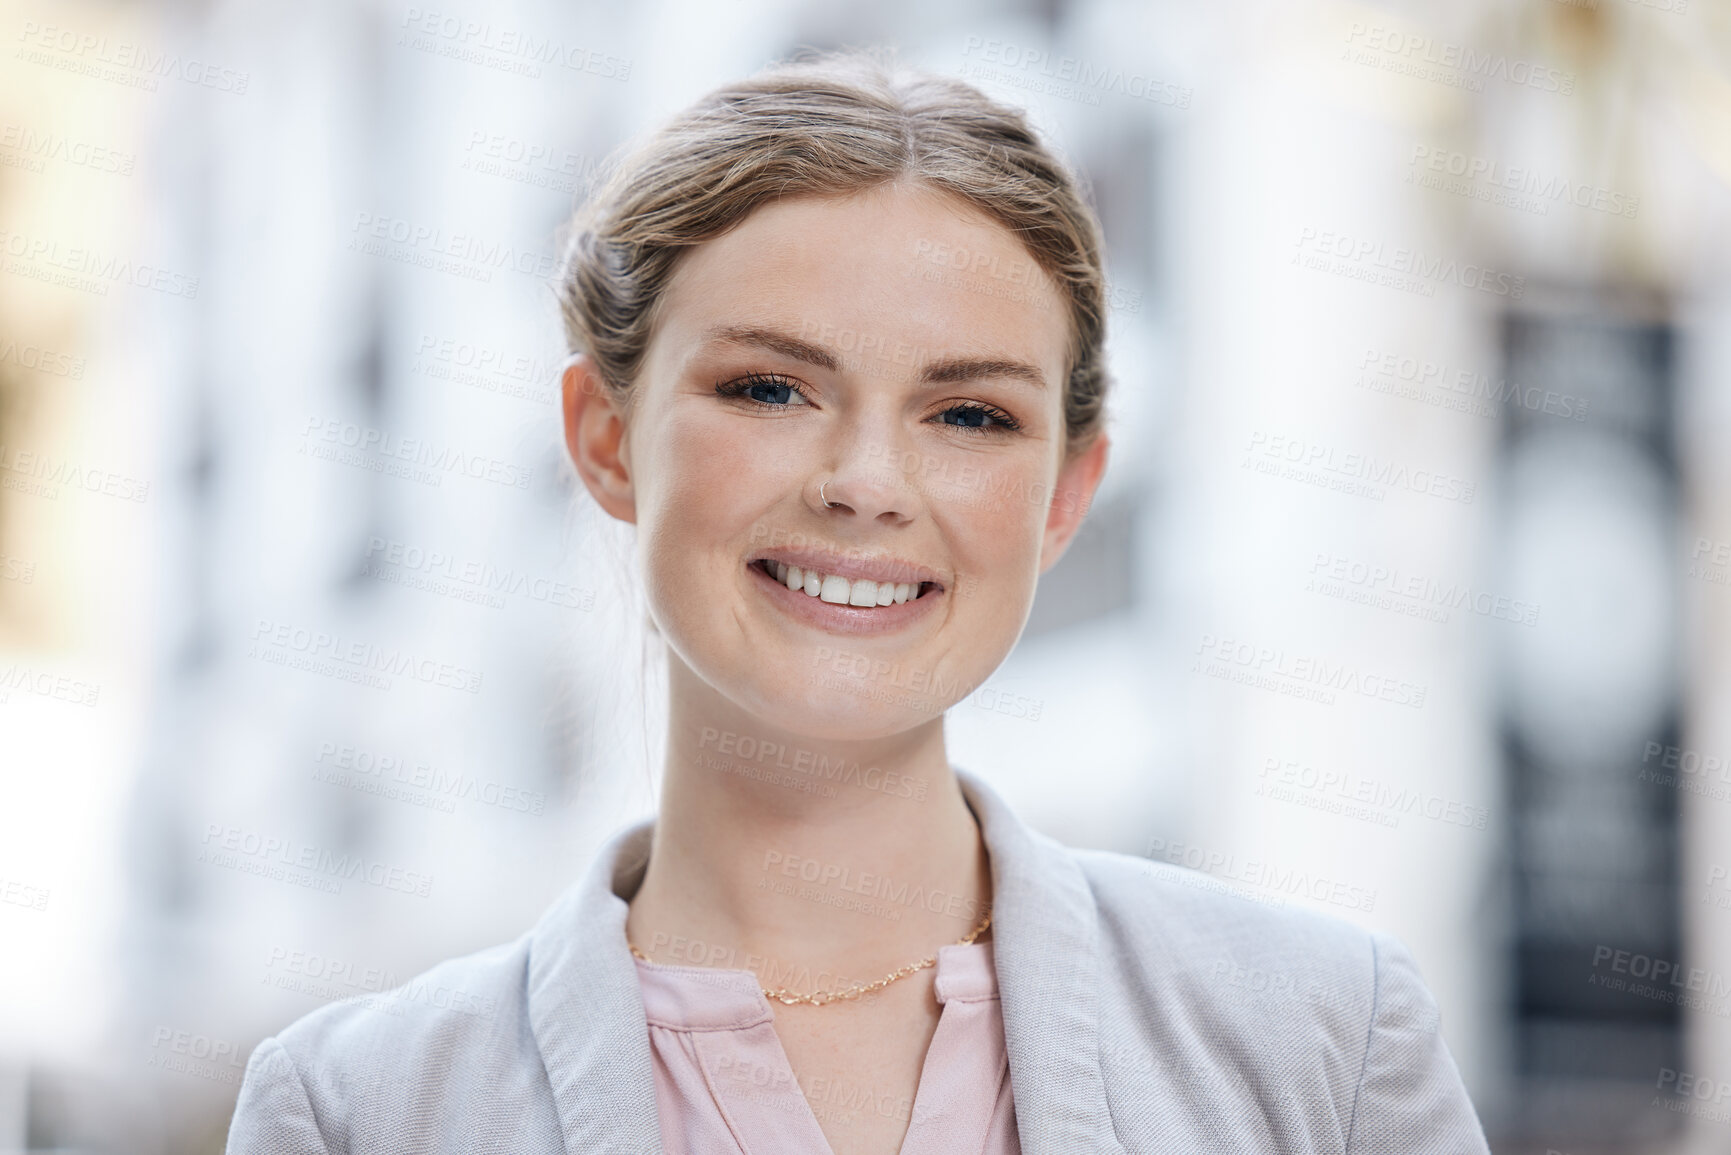 Buy stock photo Portrait of a smile of a happy woman entrepreneur outside with vision for a success in business and her startup company. Corporate worker, startup or manager face looking cheerful with motivated